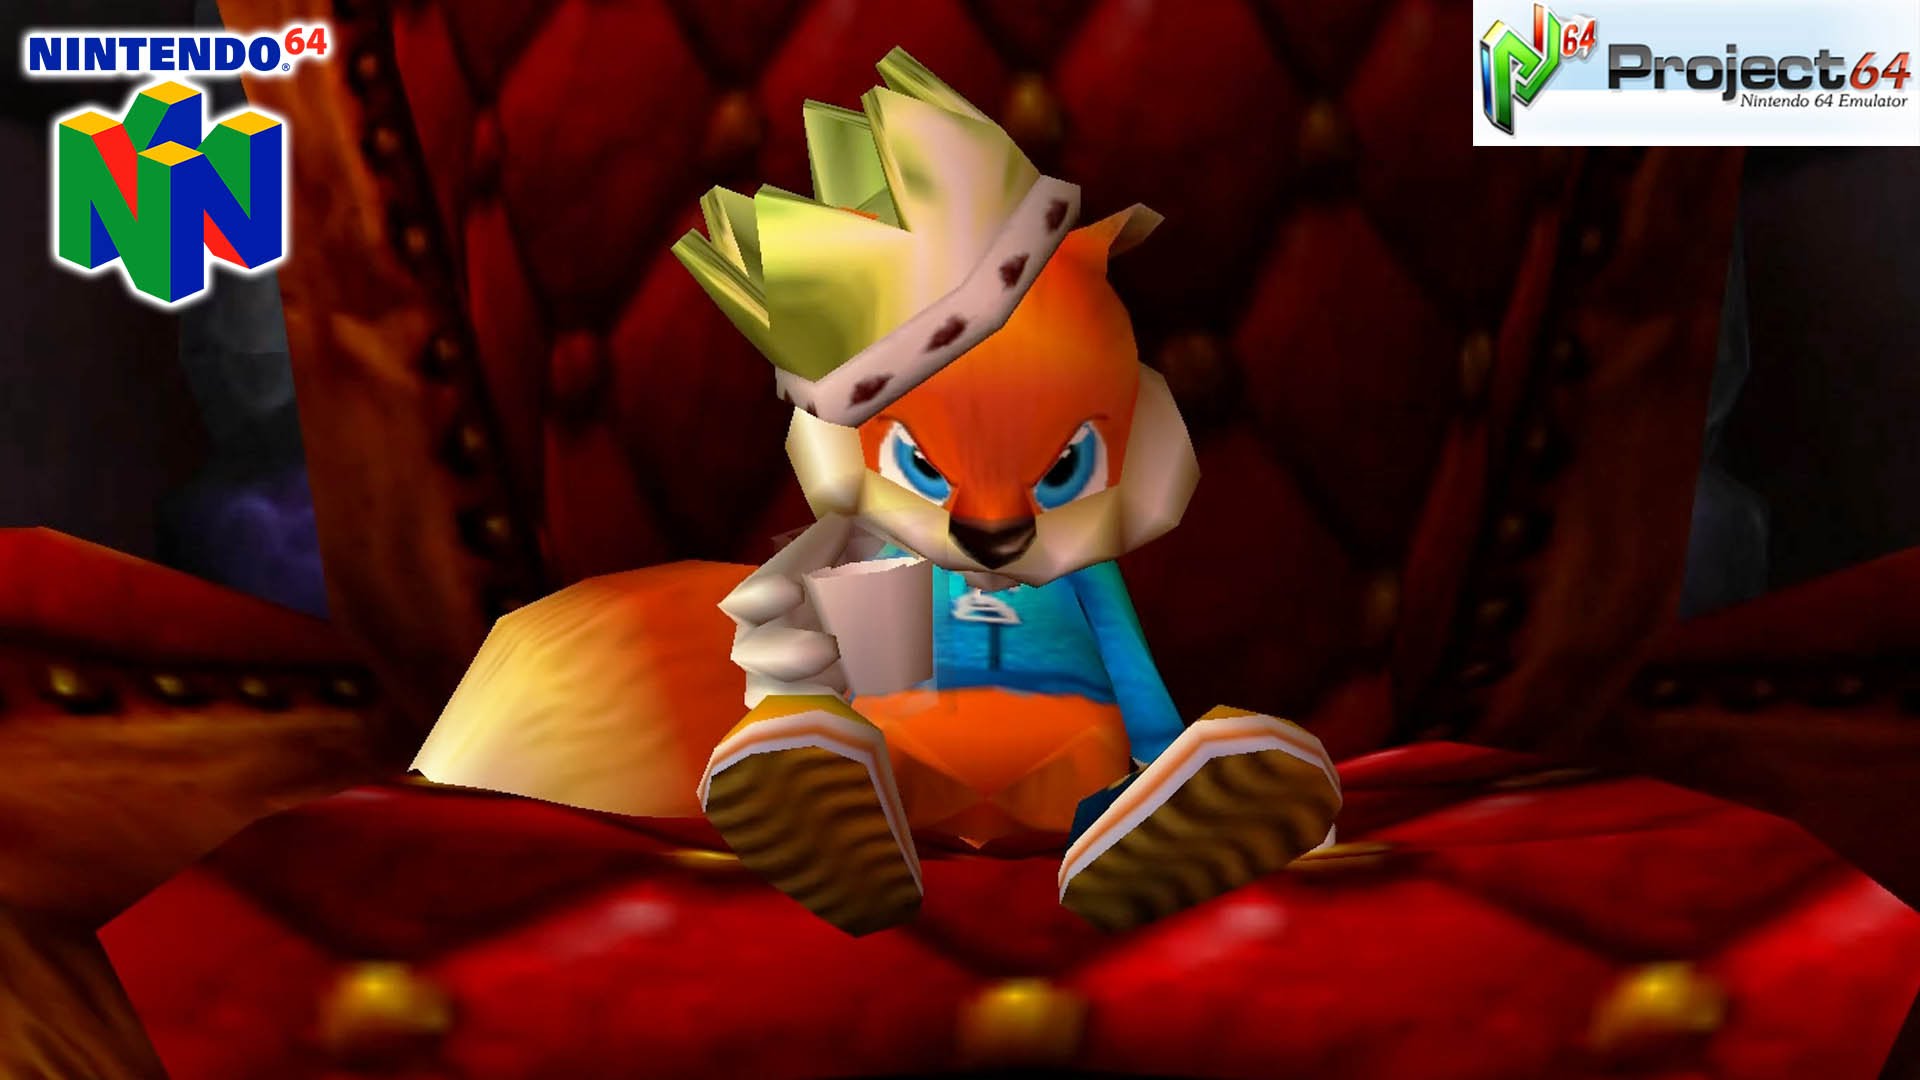 Conker's Bad Fur Day Backgrounds, Compatible - PC, Mobile, Gadgets| 1920x1080 px